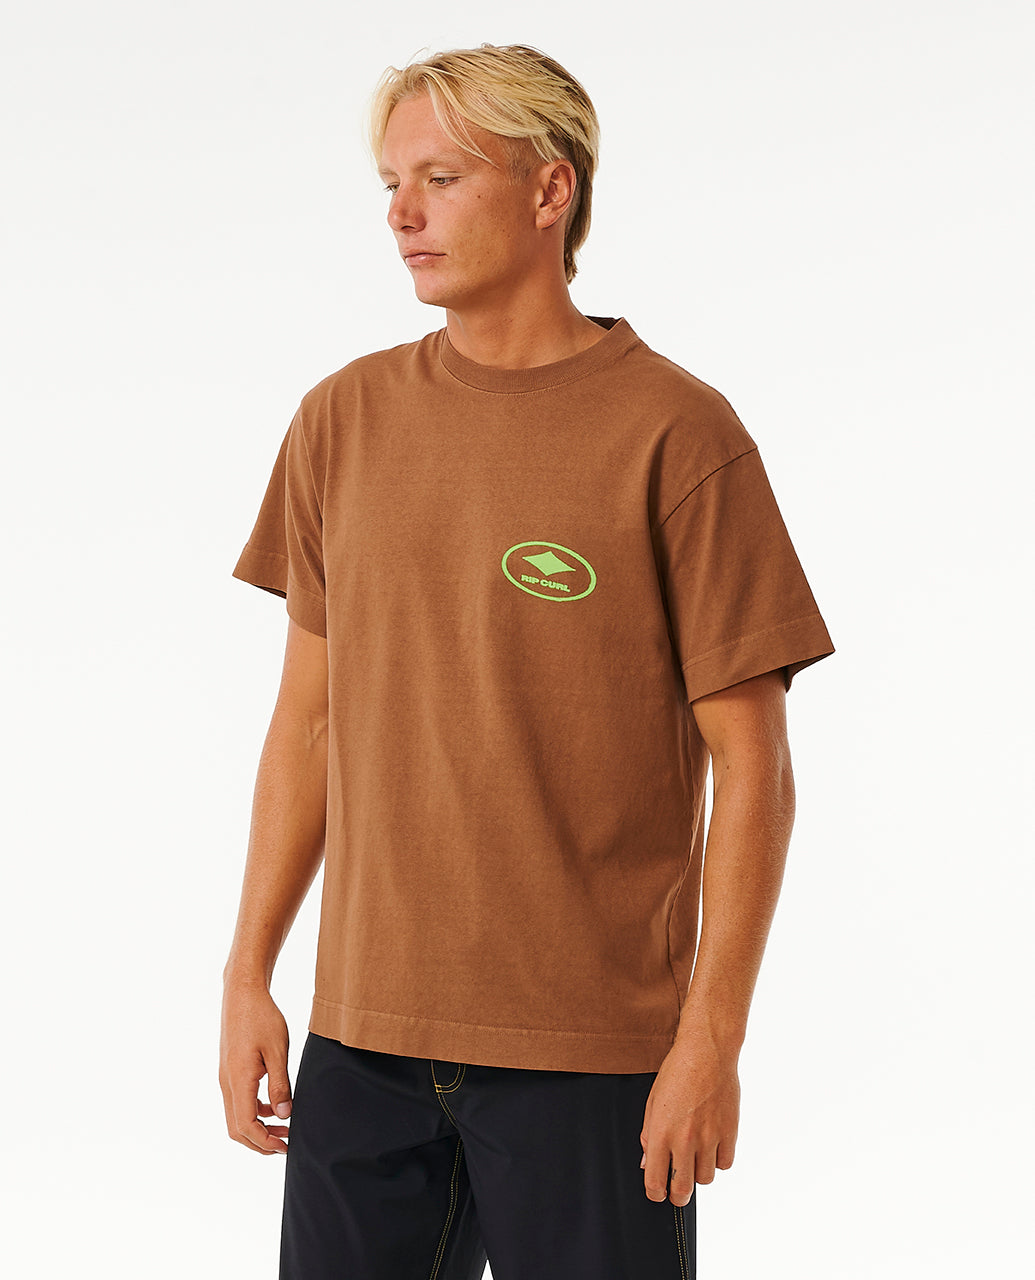 QUALITY SURF PRODUCTS OVAL TEE